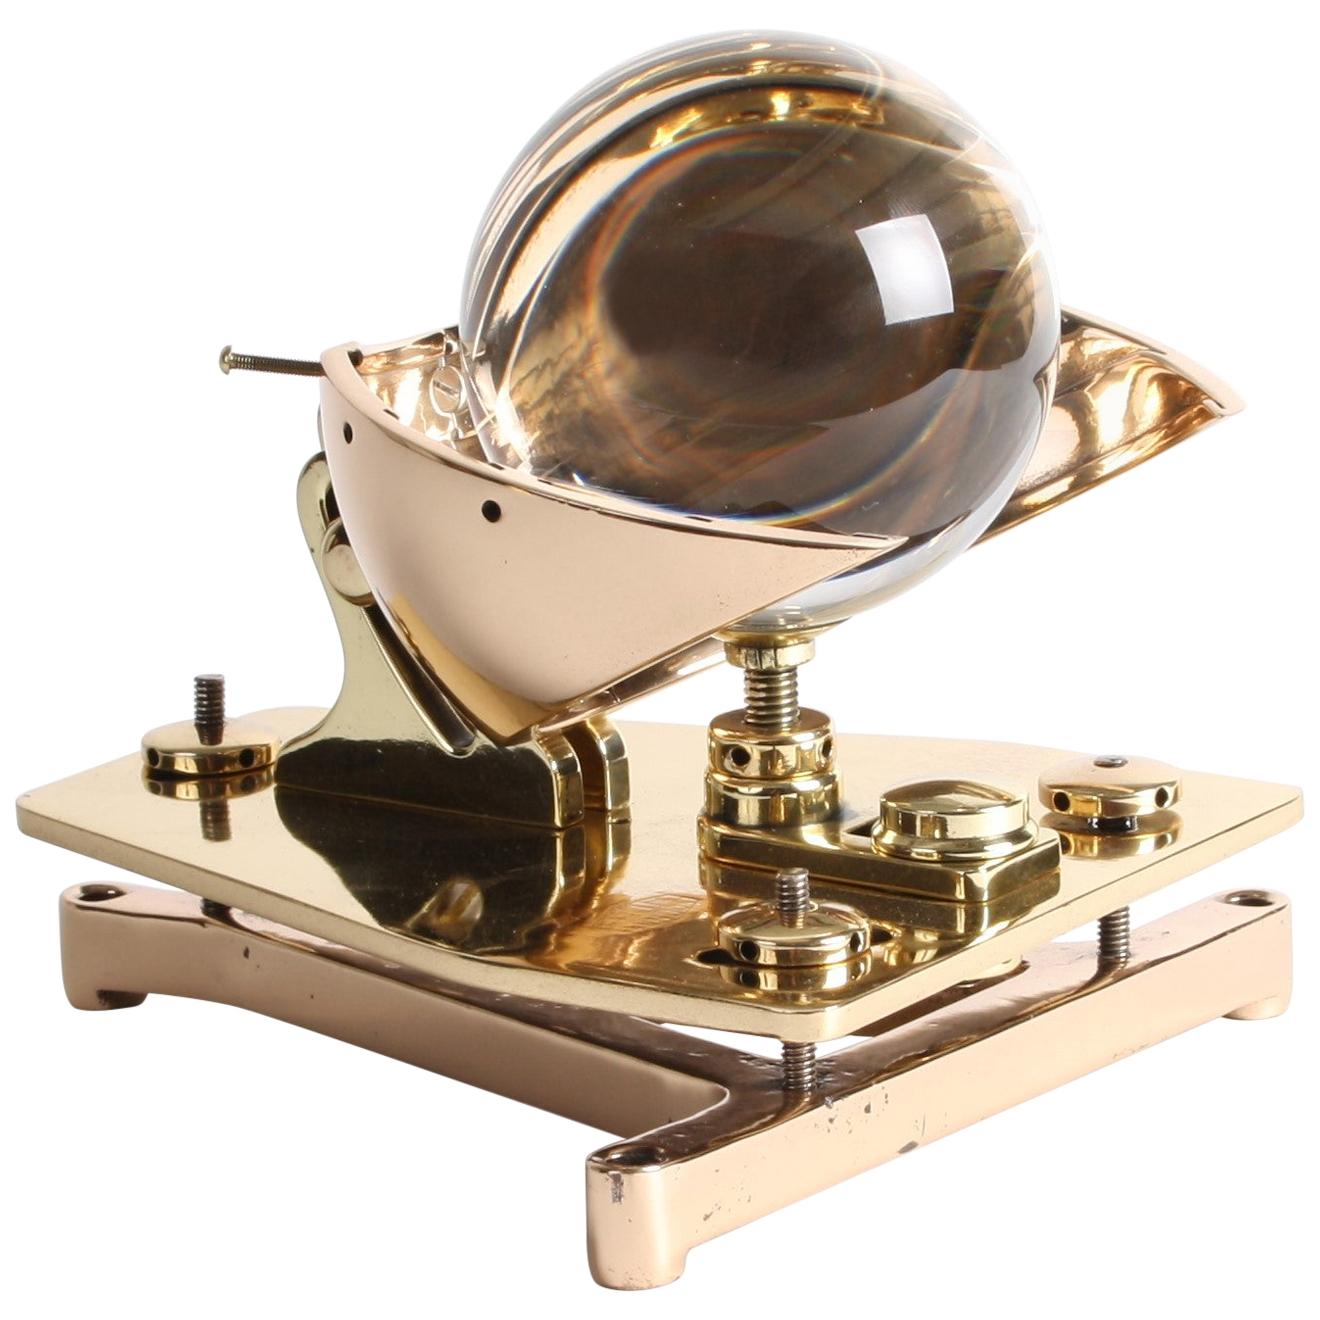 Campbell–Stokes Sphere Sunshine Recorder by Casella of London